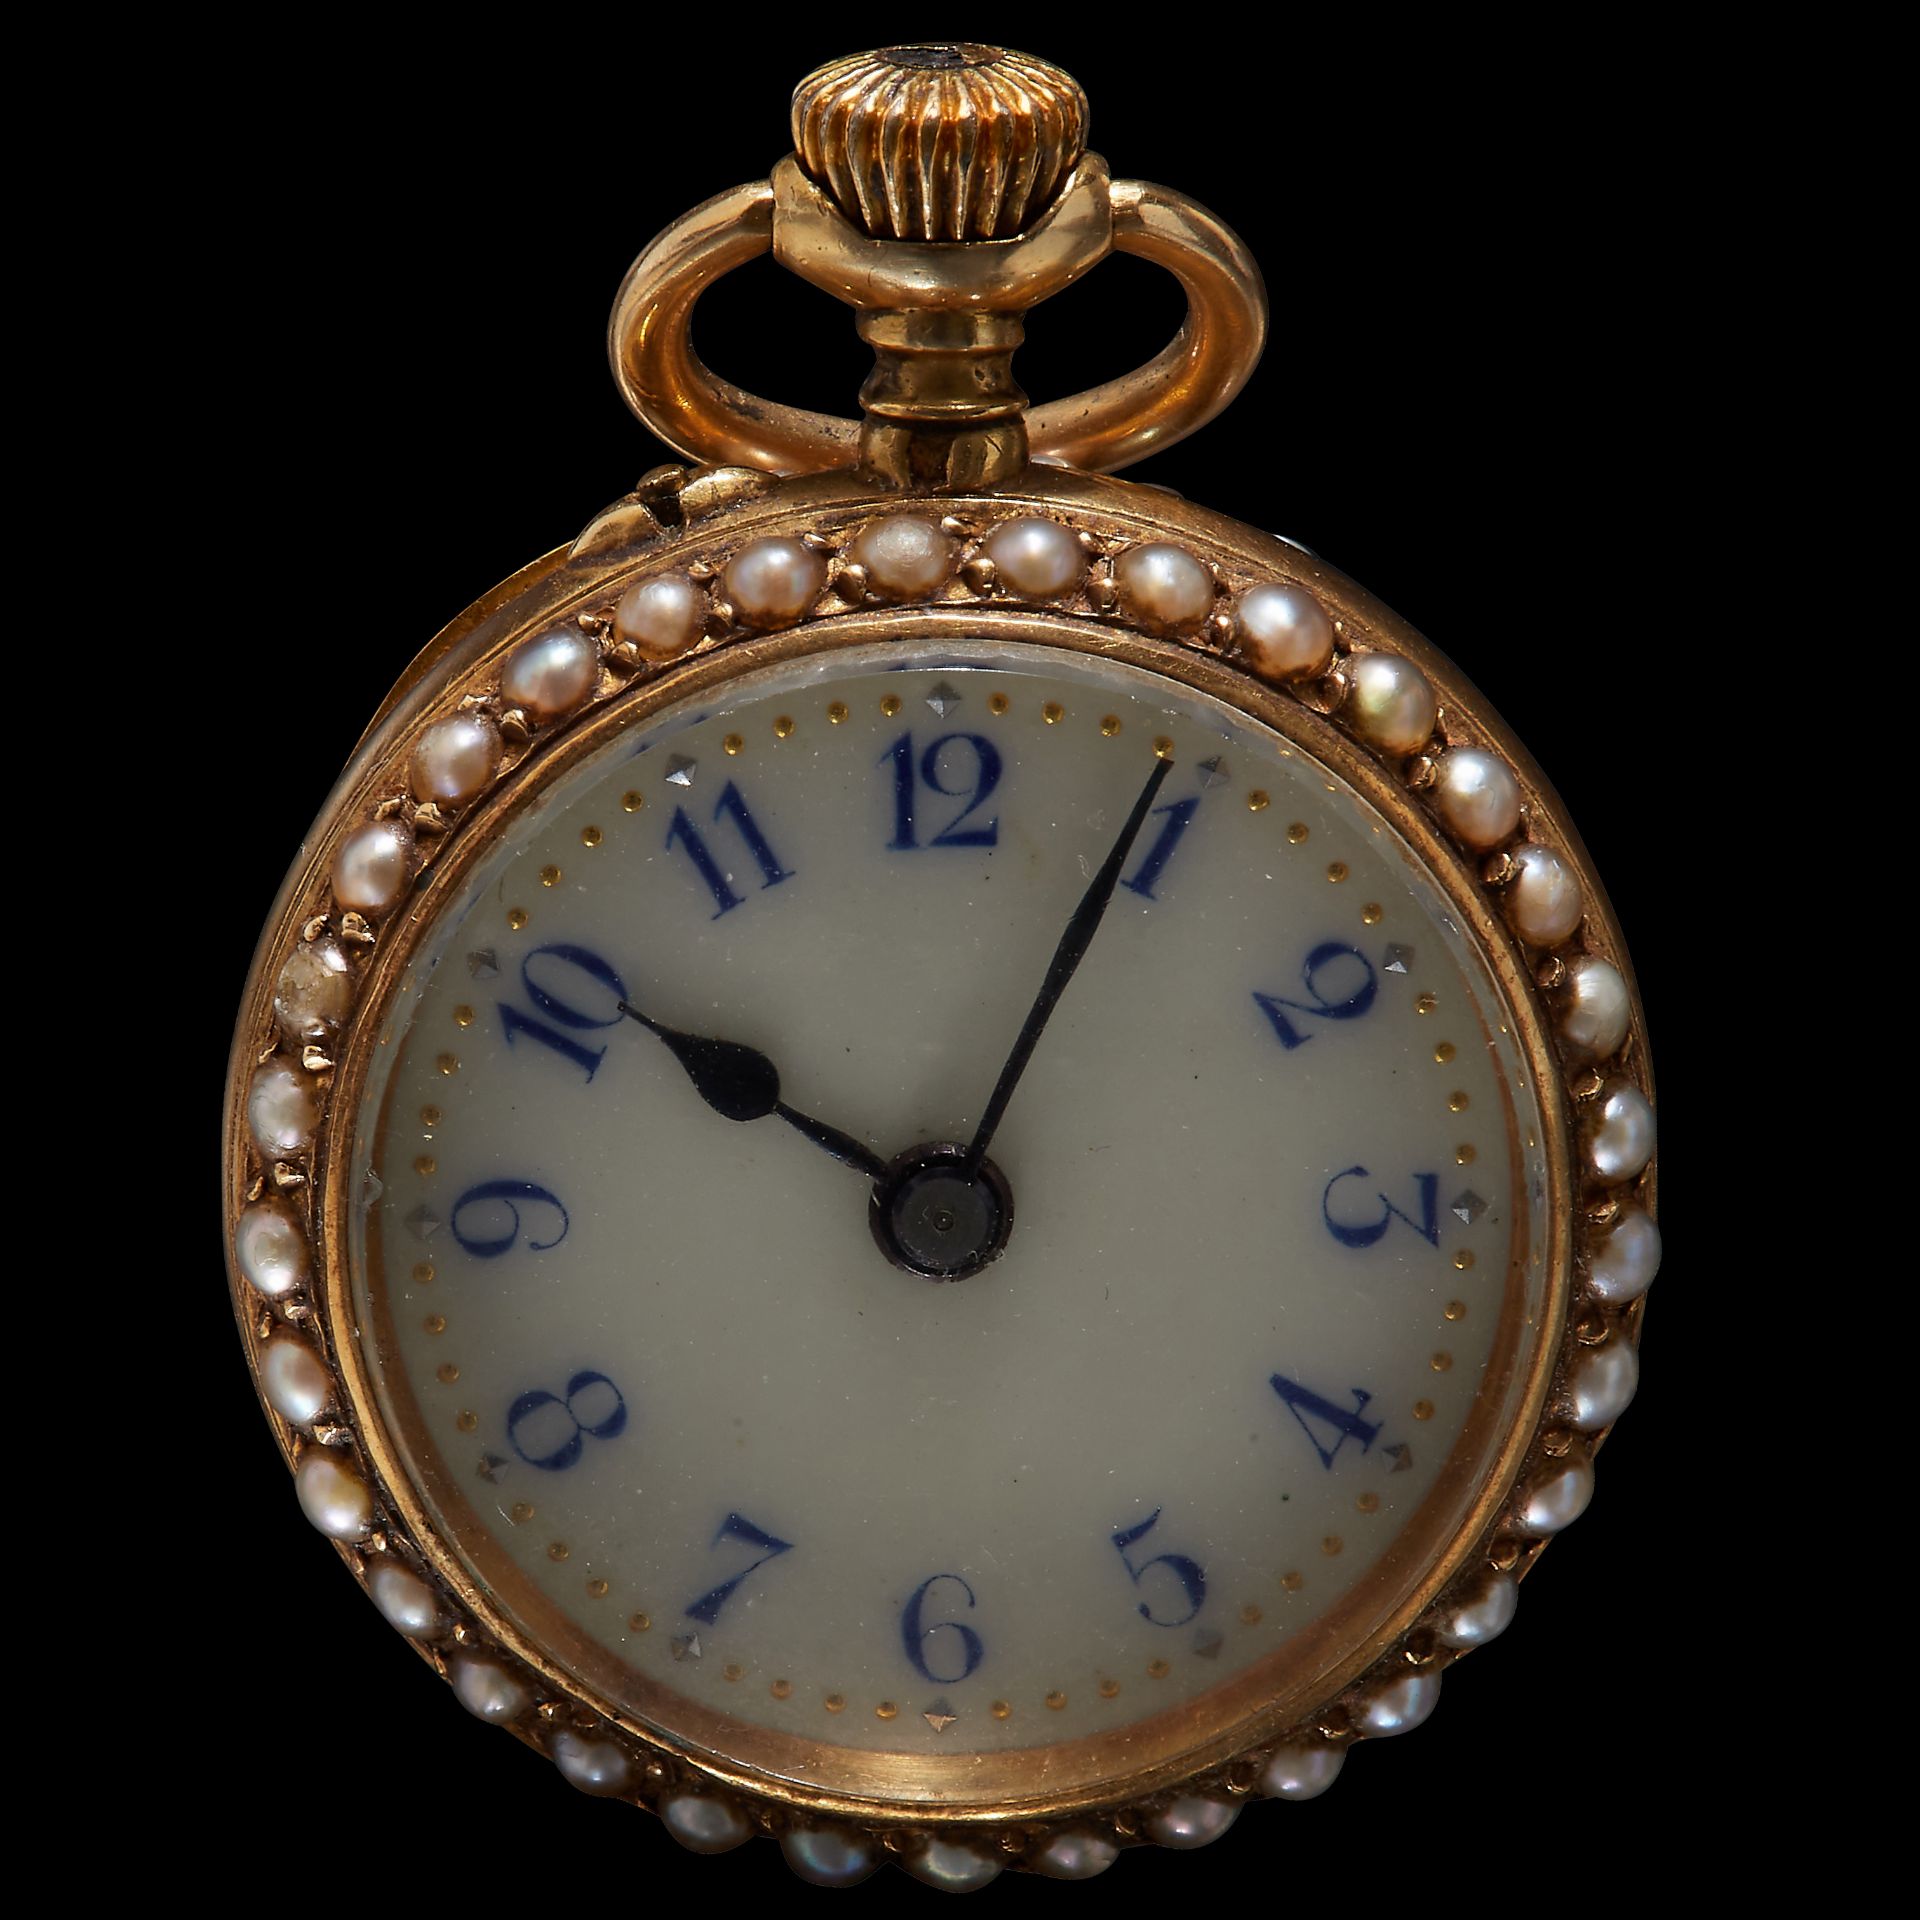 RARE VICTORIAN PEARL, ENAMEL AND DIAMOND POCKET WATCH - Image 2 of 2